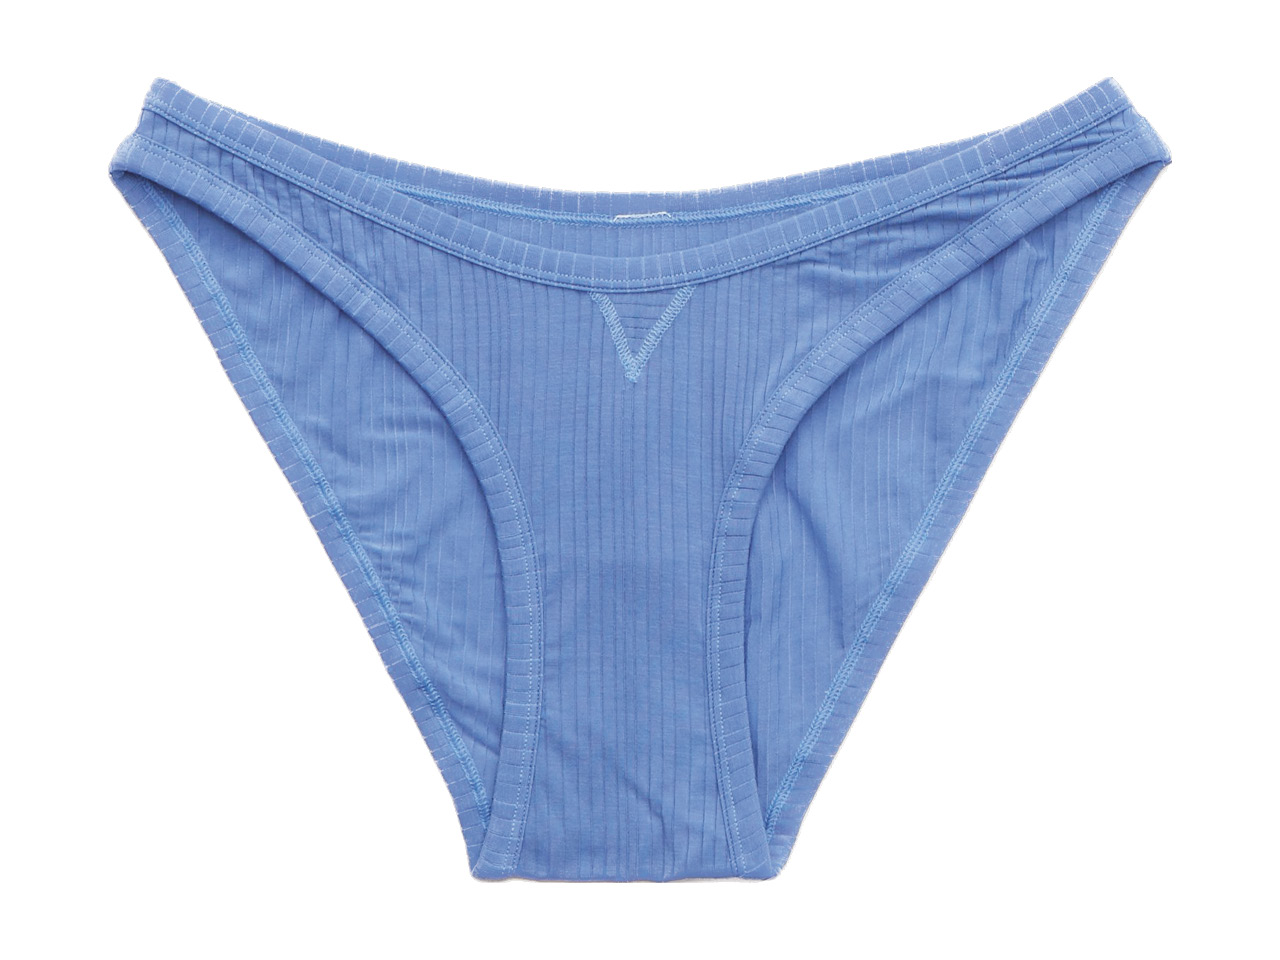 A pair of blue Aerie bikini underwear made from ribbed modal.